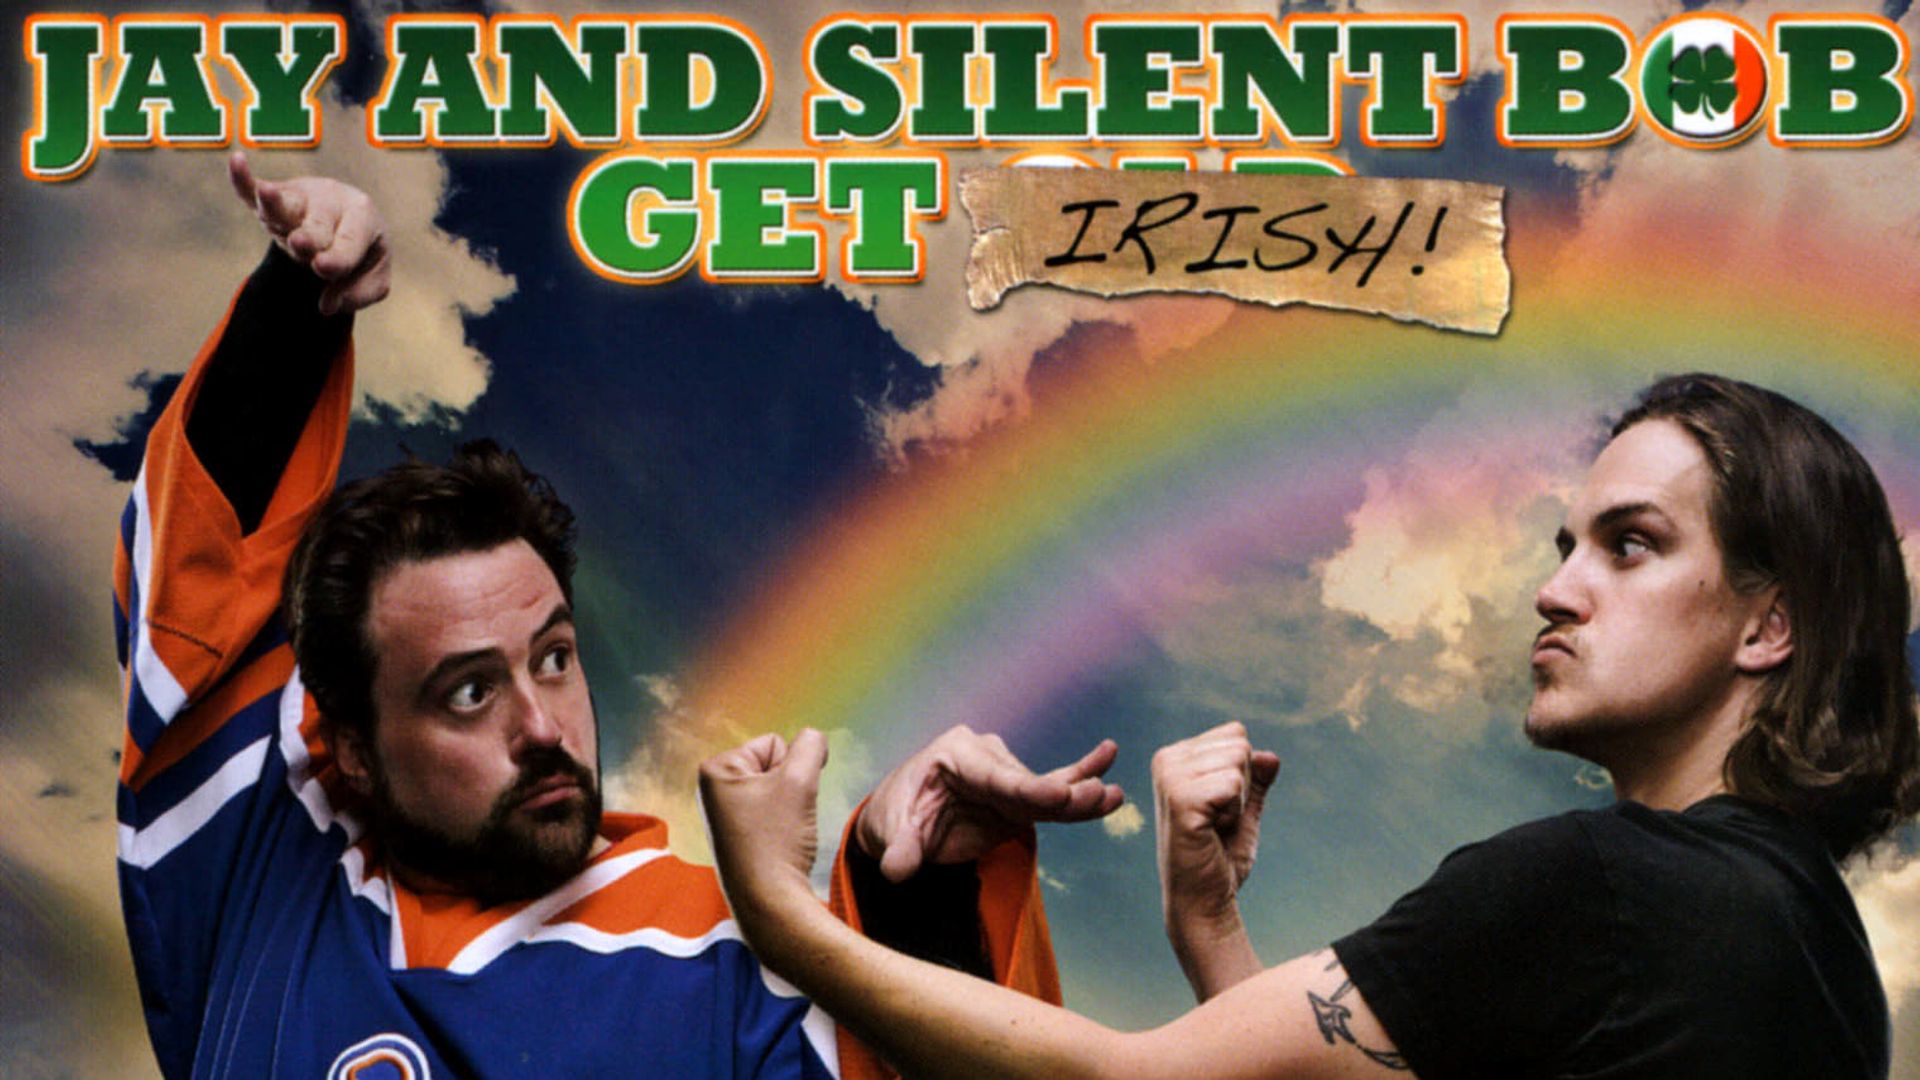 Jay and Silent Bob Get Irish: The Swearing O' the Green background